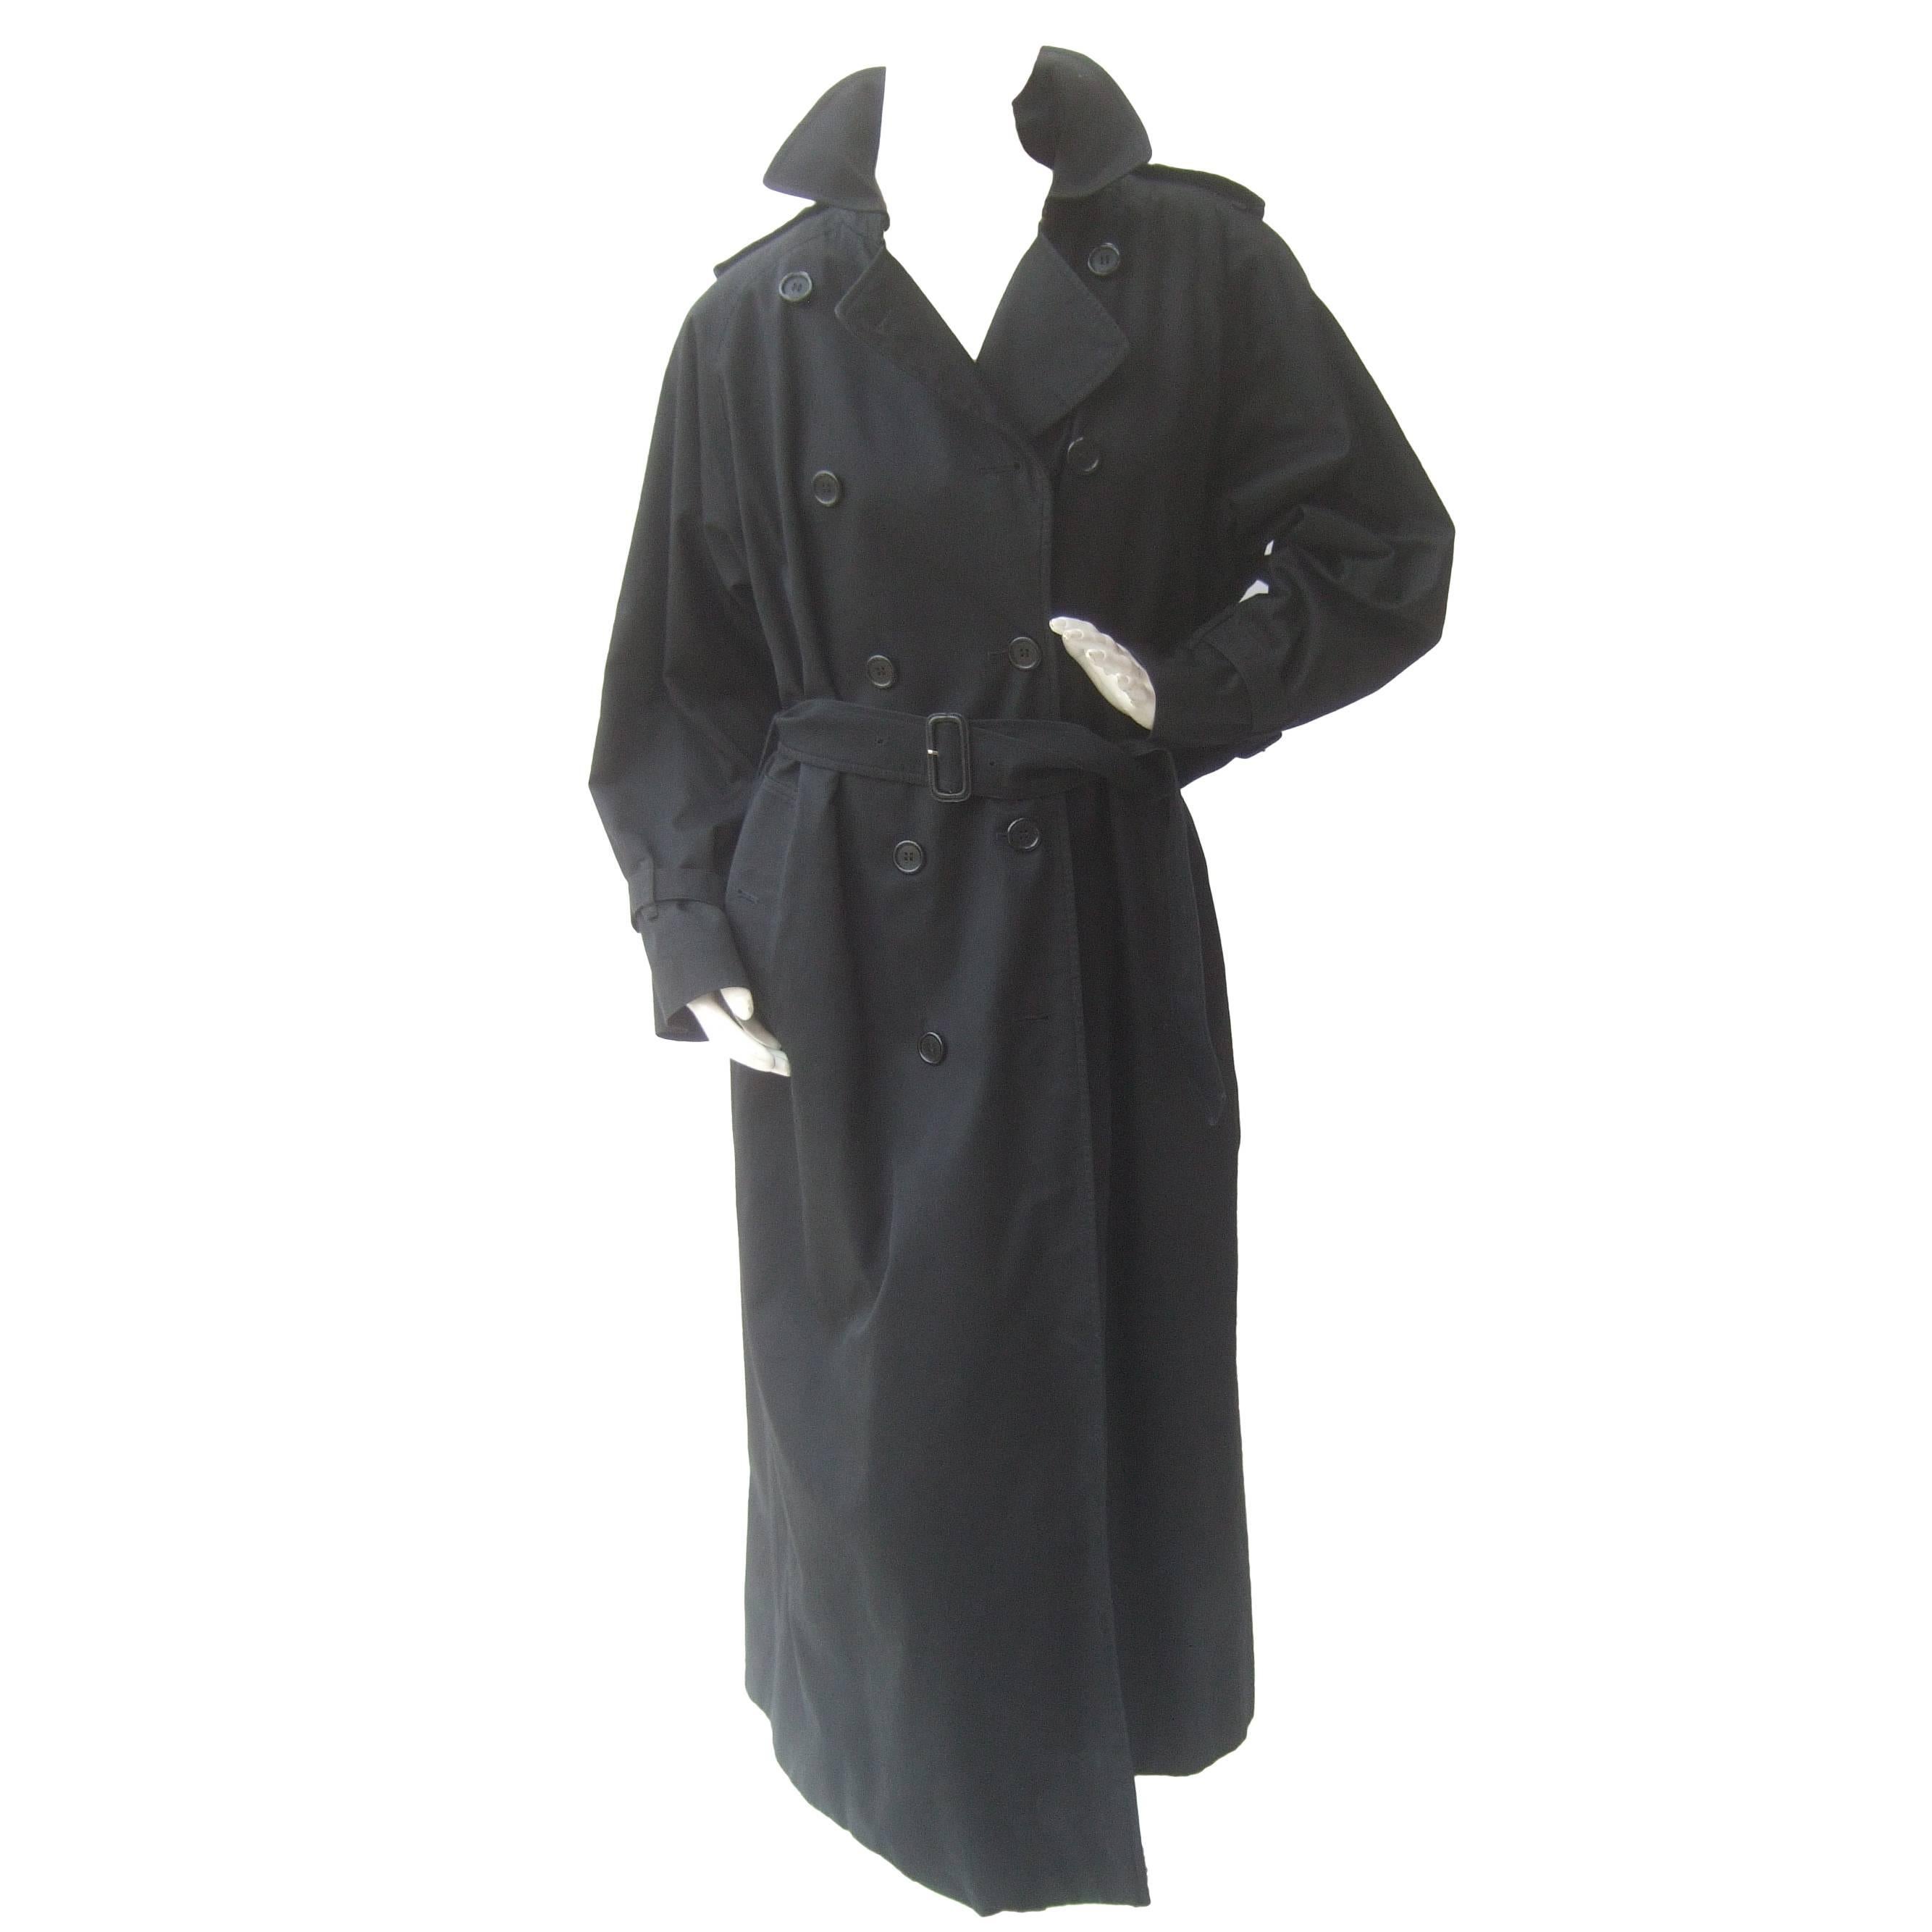 Burberry's Prorsum Vintage Women's Black Belted Trench Coach Size 10 X X Long